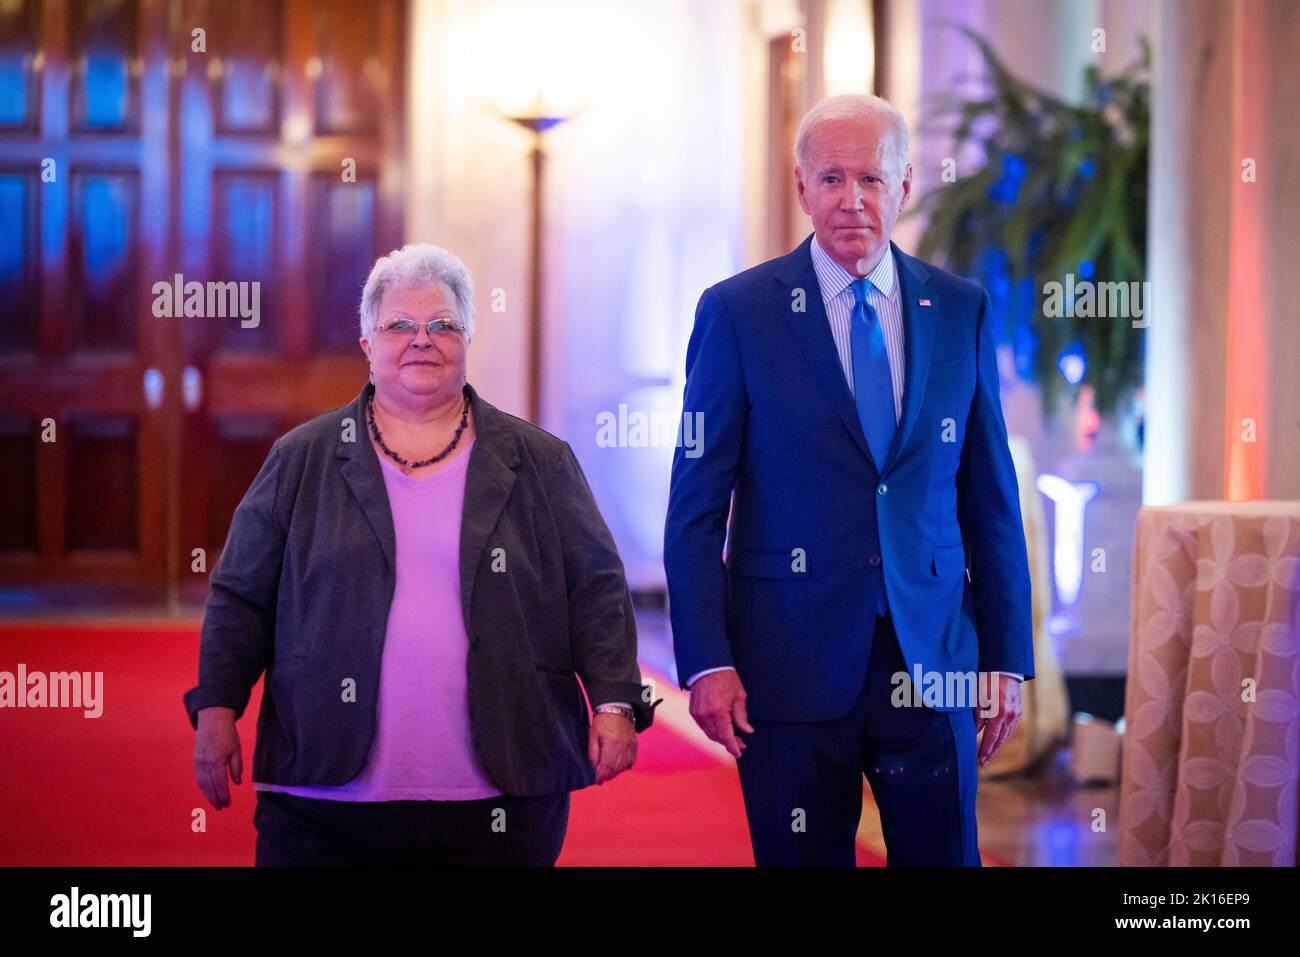 Washington DC, USA. 15th Sep, 2022. United States President Joe Biden (R) along with Susan Bro (L) prepares to speak at the United We Stand Summit in the East Room of the White House in Washington DC, USA, 15 September 2022. Bro is the mother of Heather Heyer, who was killed at the Unite the Right rally in Charlottesville, Virginia in 2017. Credit: Jim LoScalzo/Pool via CNP/dpa/Alamy Live News Stock Photo